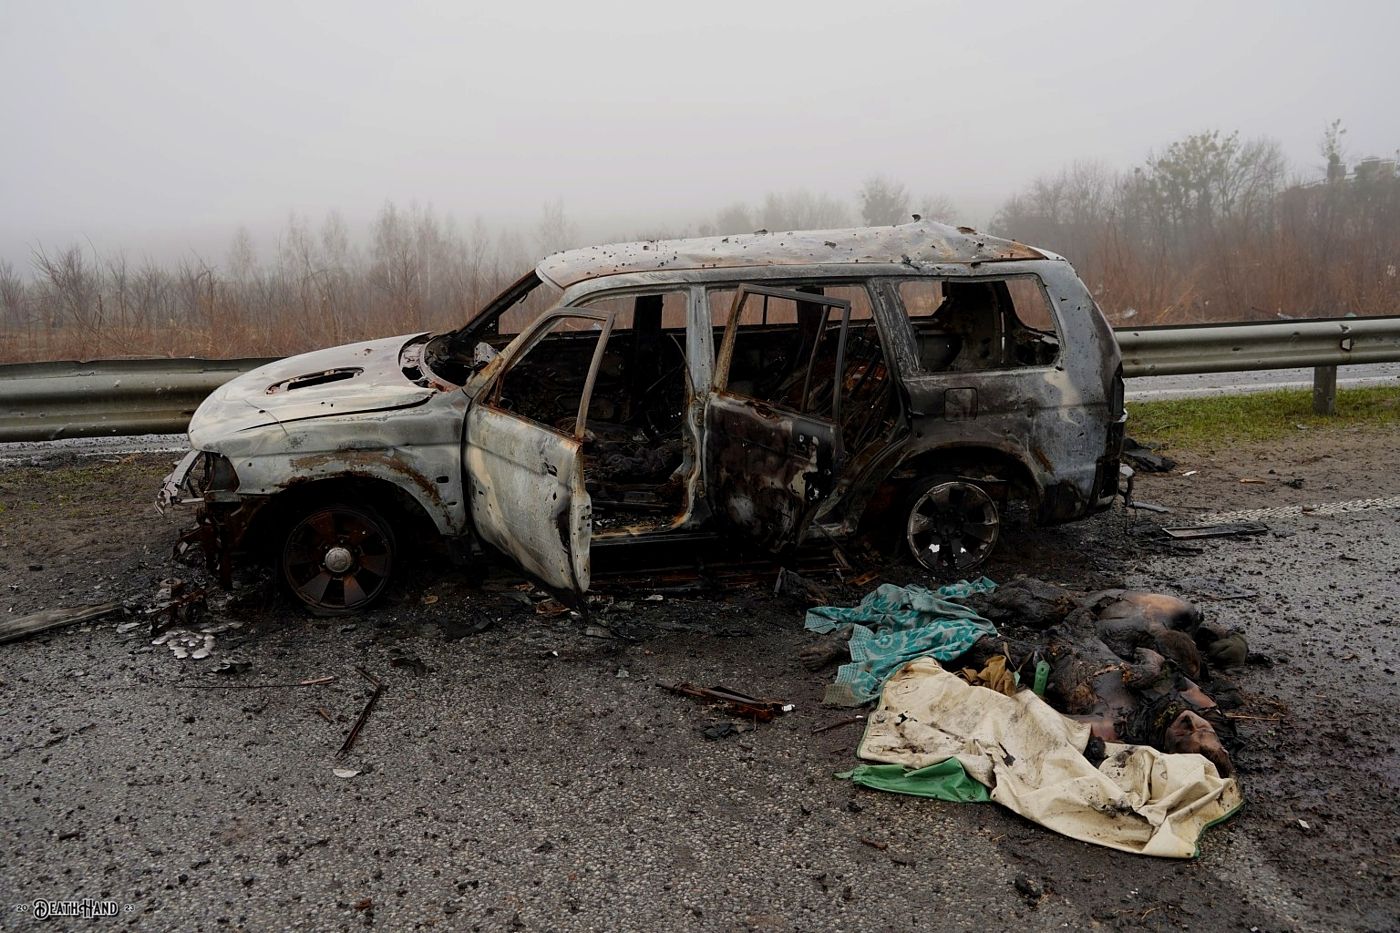 DH - M06 highway carnage beetween towns of Mriia and Myla - Ukraine 16 - early April 2022.jpg